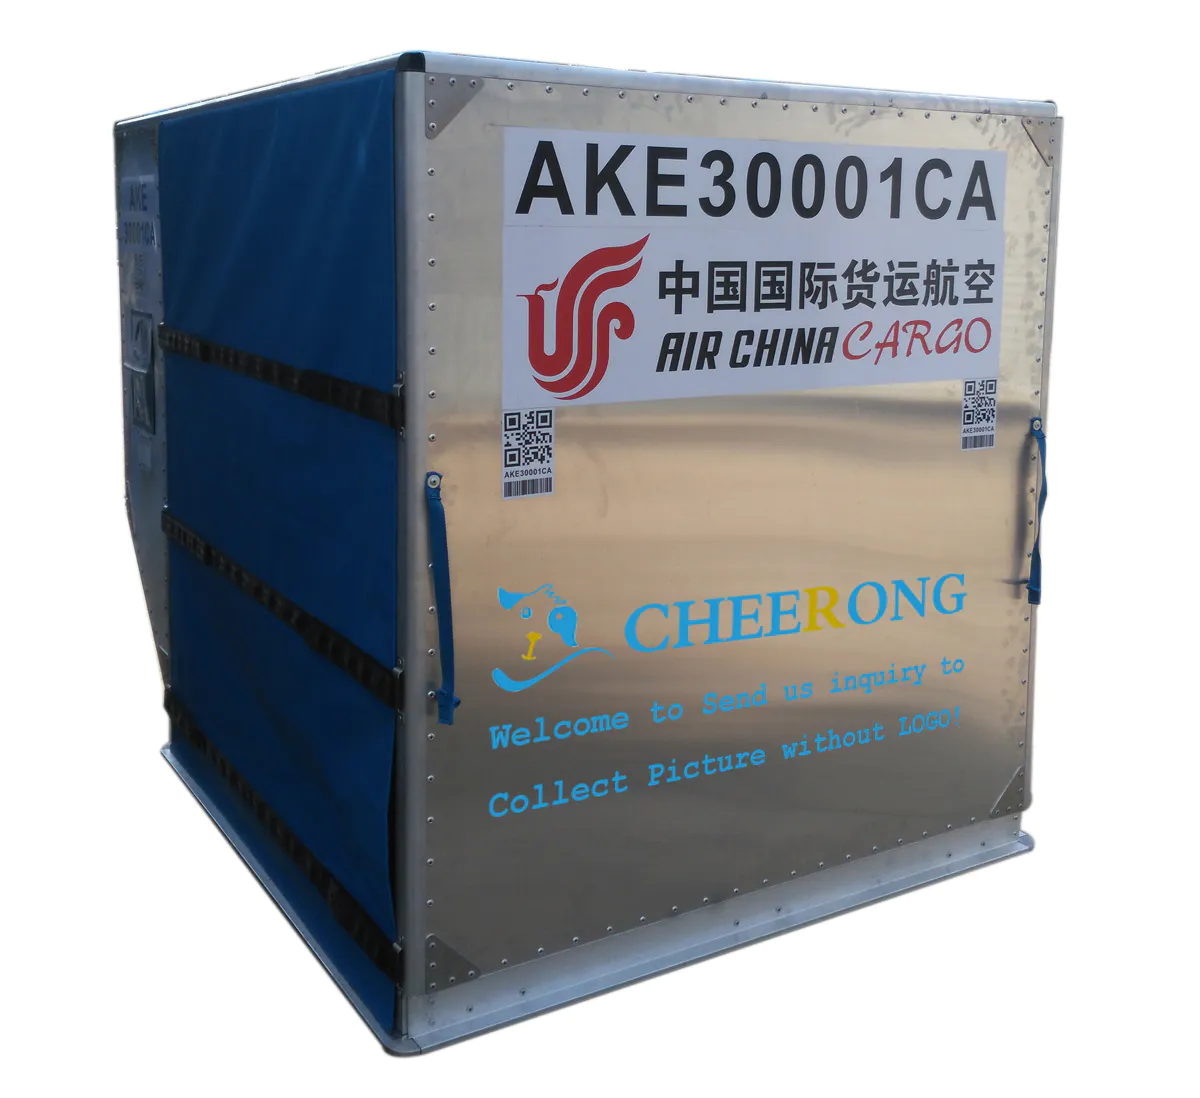 Cheerong eco-friendly AKE container wholesale for airdrome